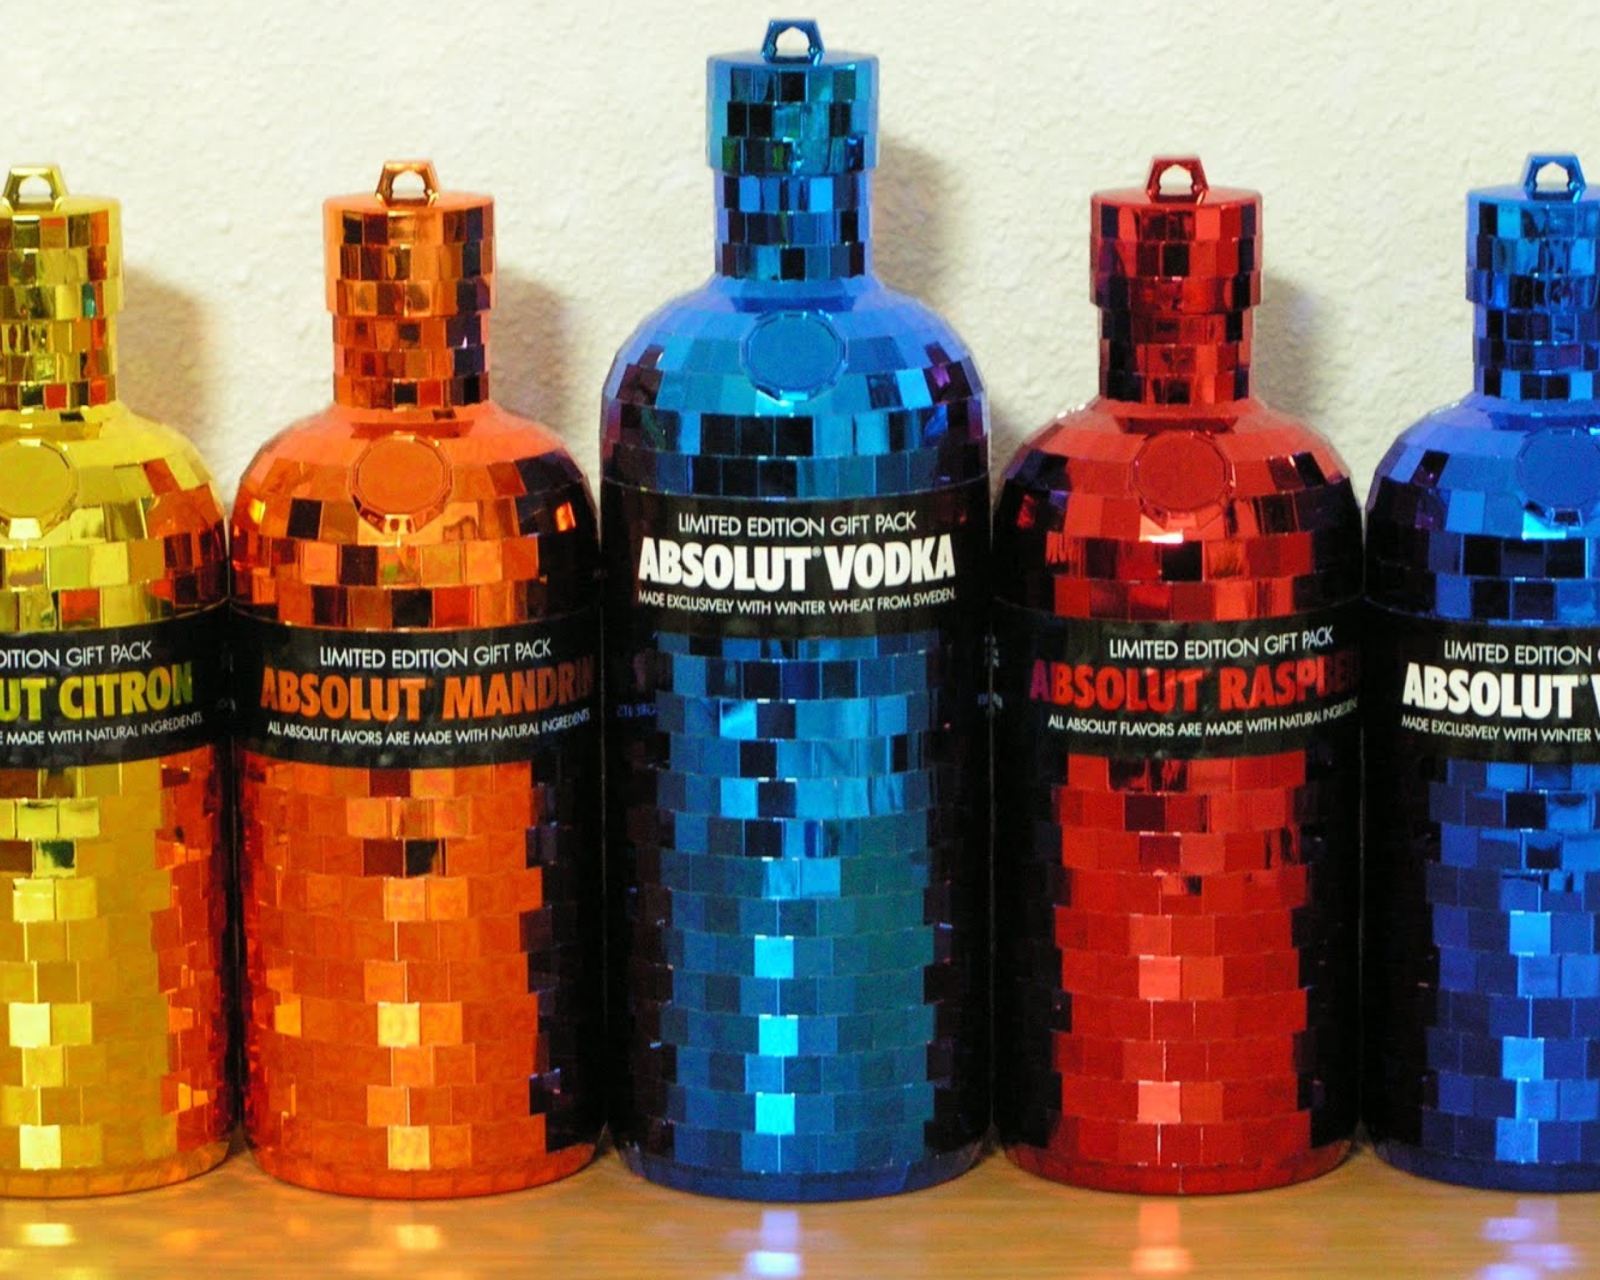 Absolut Vodka Limited Edition wallpaper 1600x1280